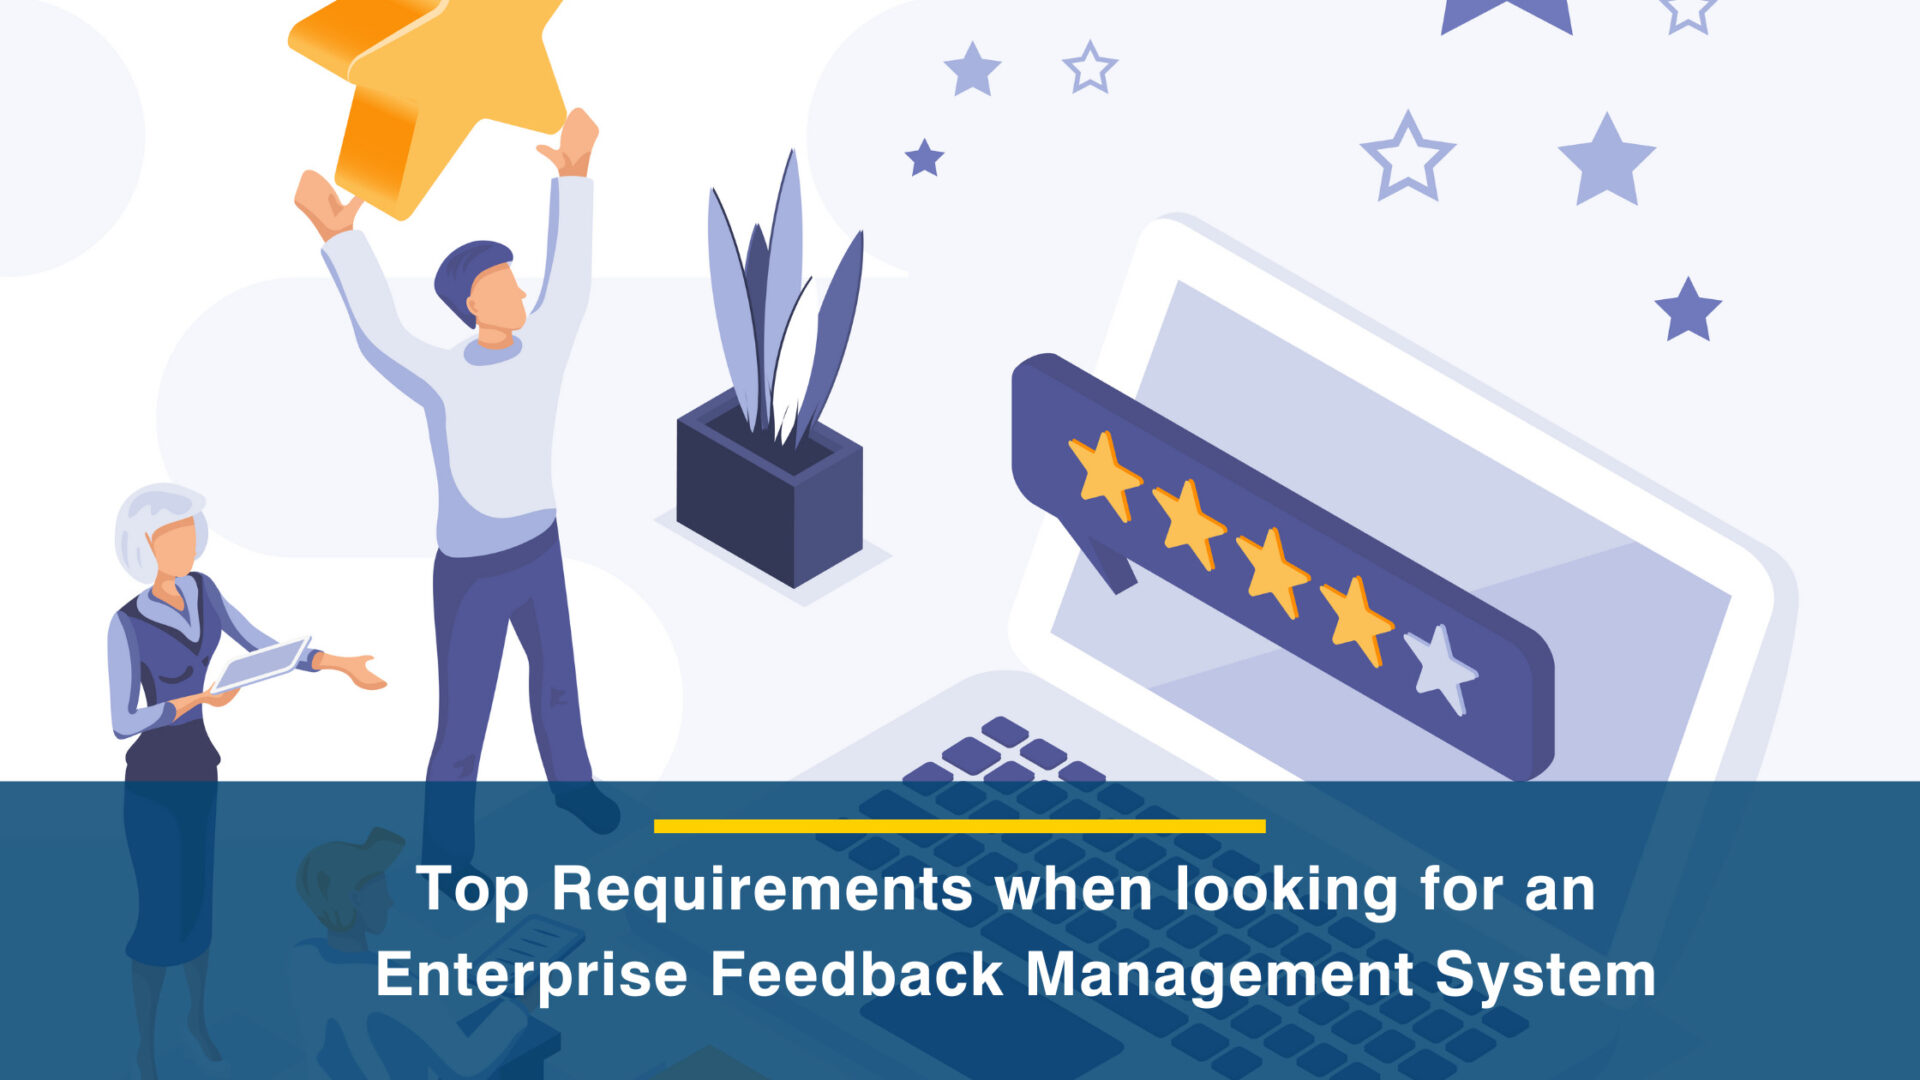 Top Requirements when Looking for an Enterprise Feedback Management System